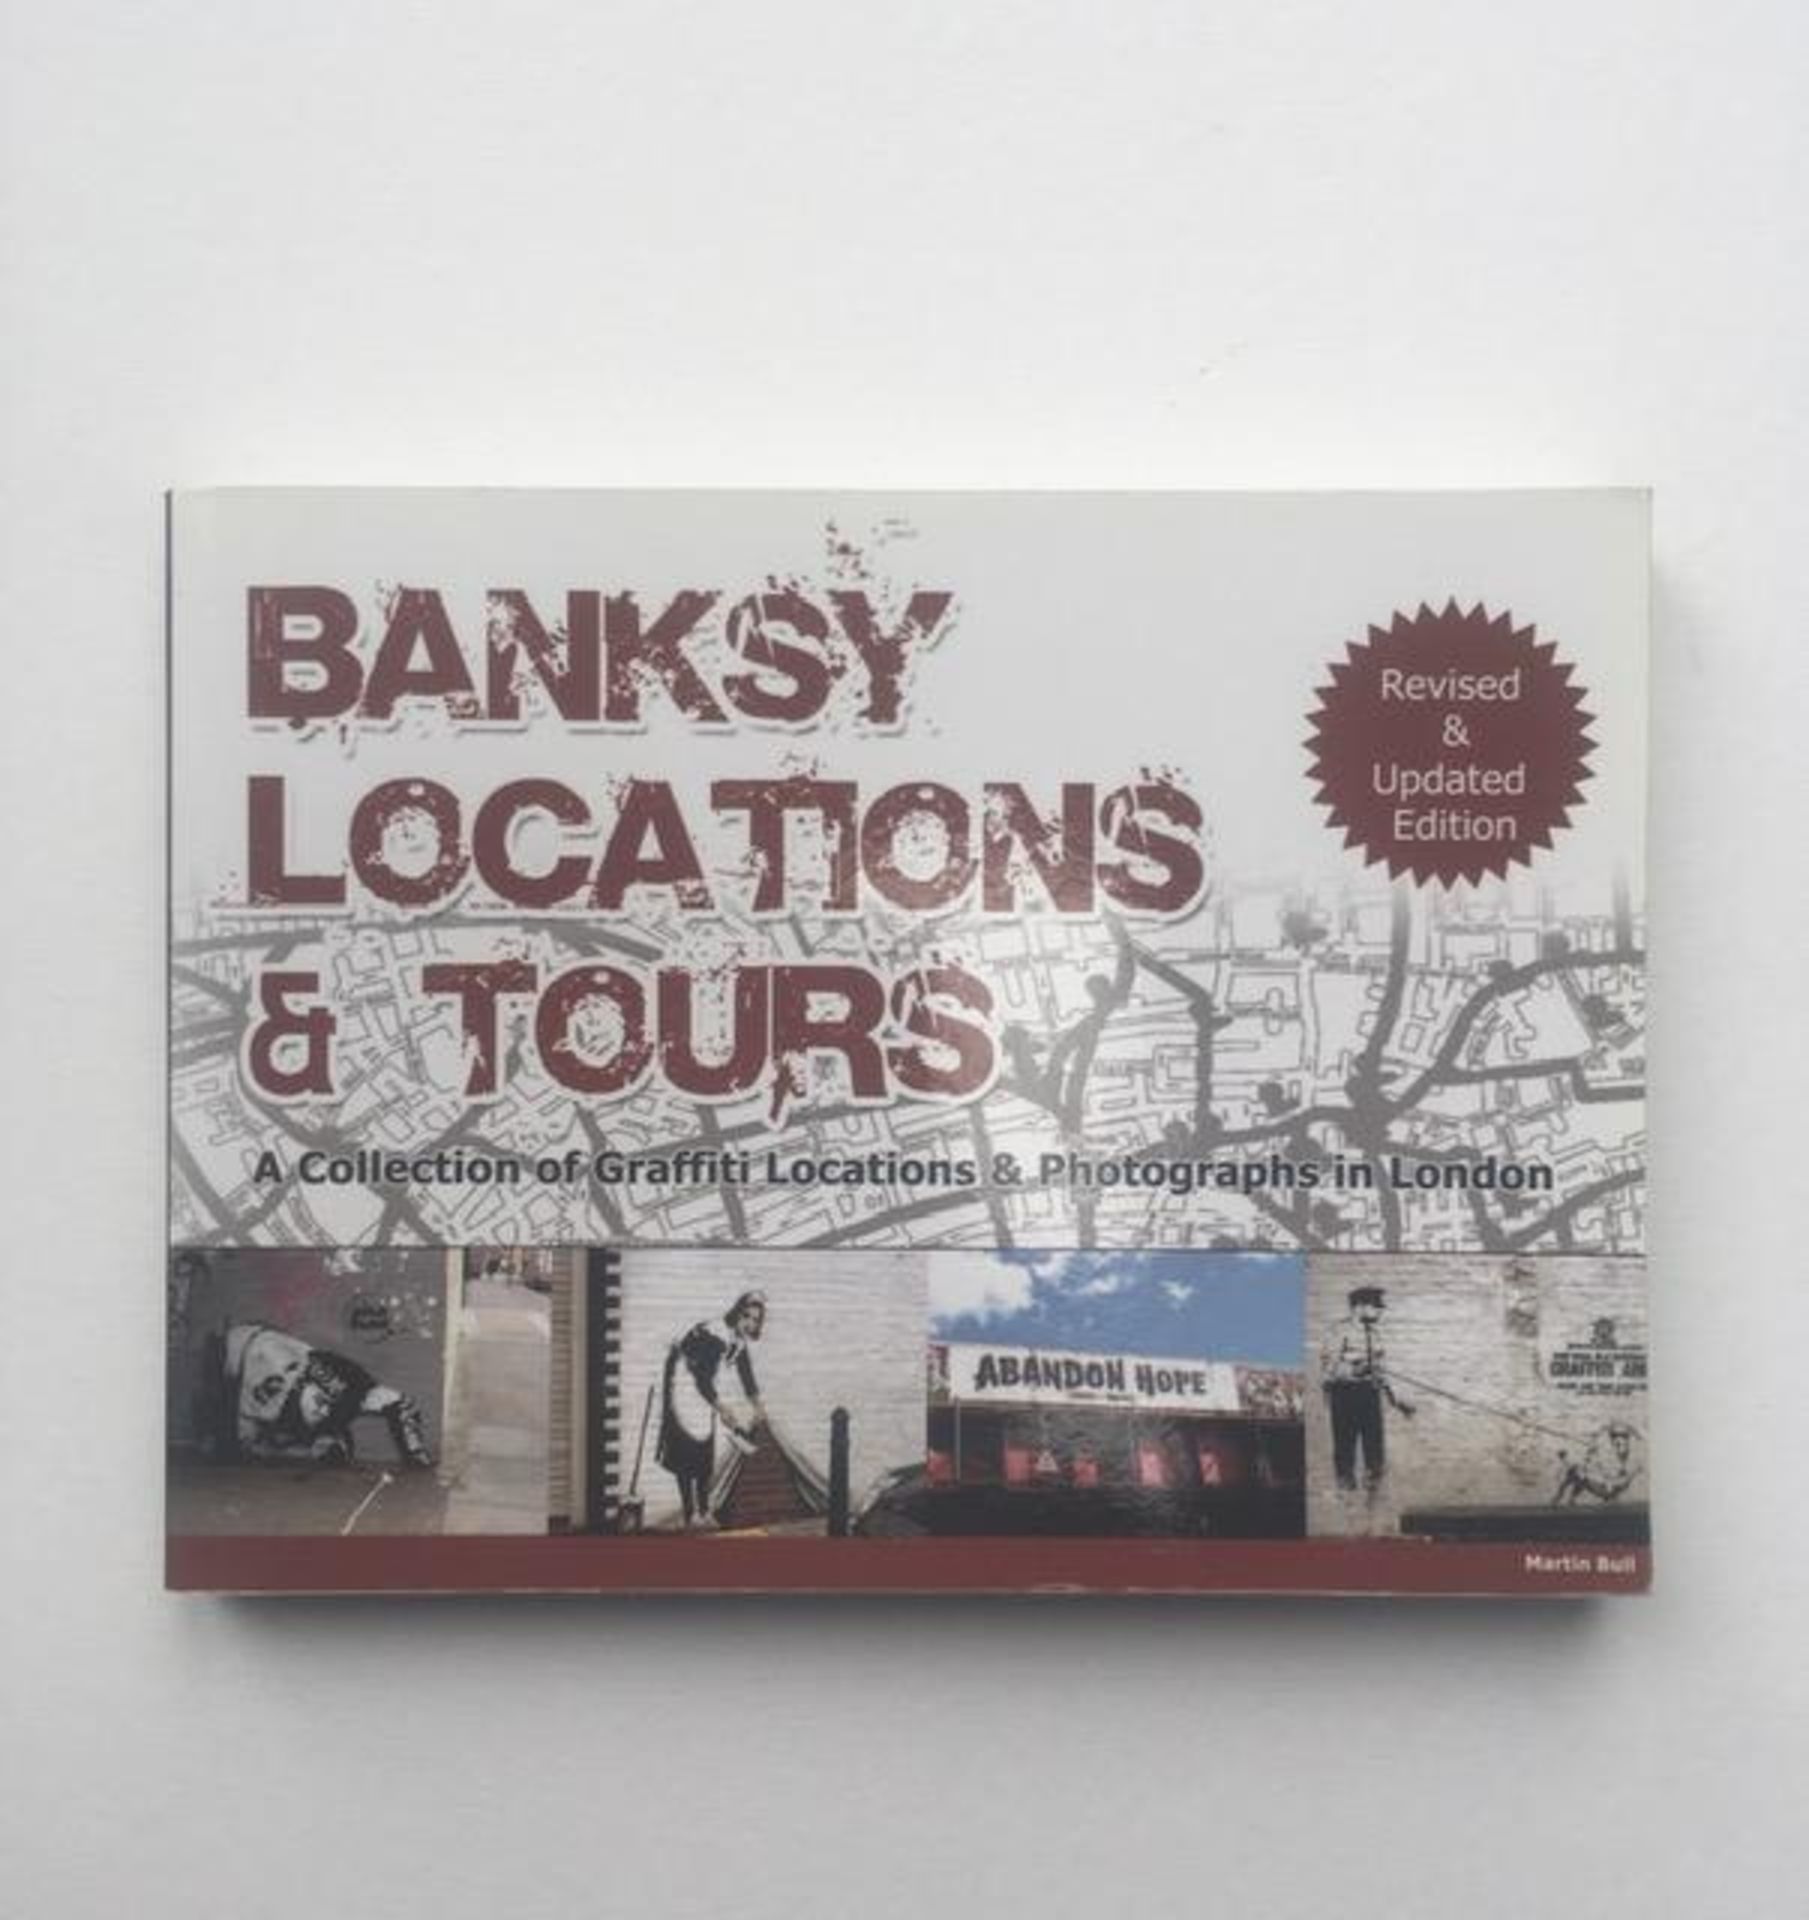 BANKSY (b.1974) ‘Martin Bulls ‘Banksy Locations & Tours’, with Postcodes, Volume 1, 2nd Ed, 2010